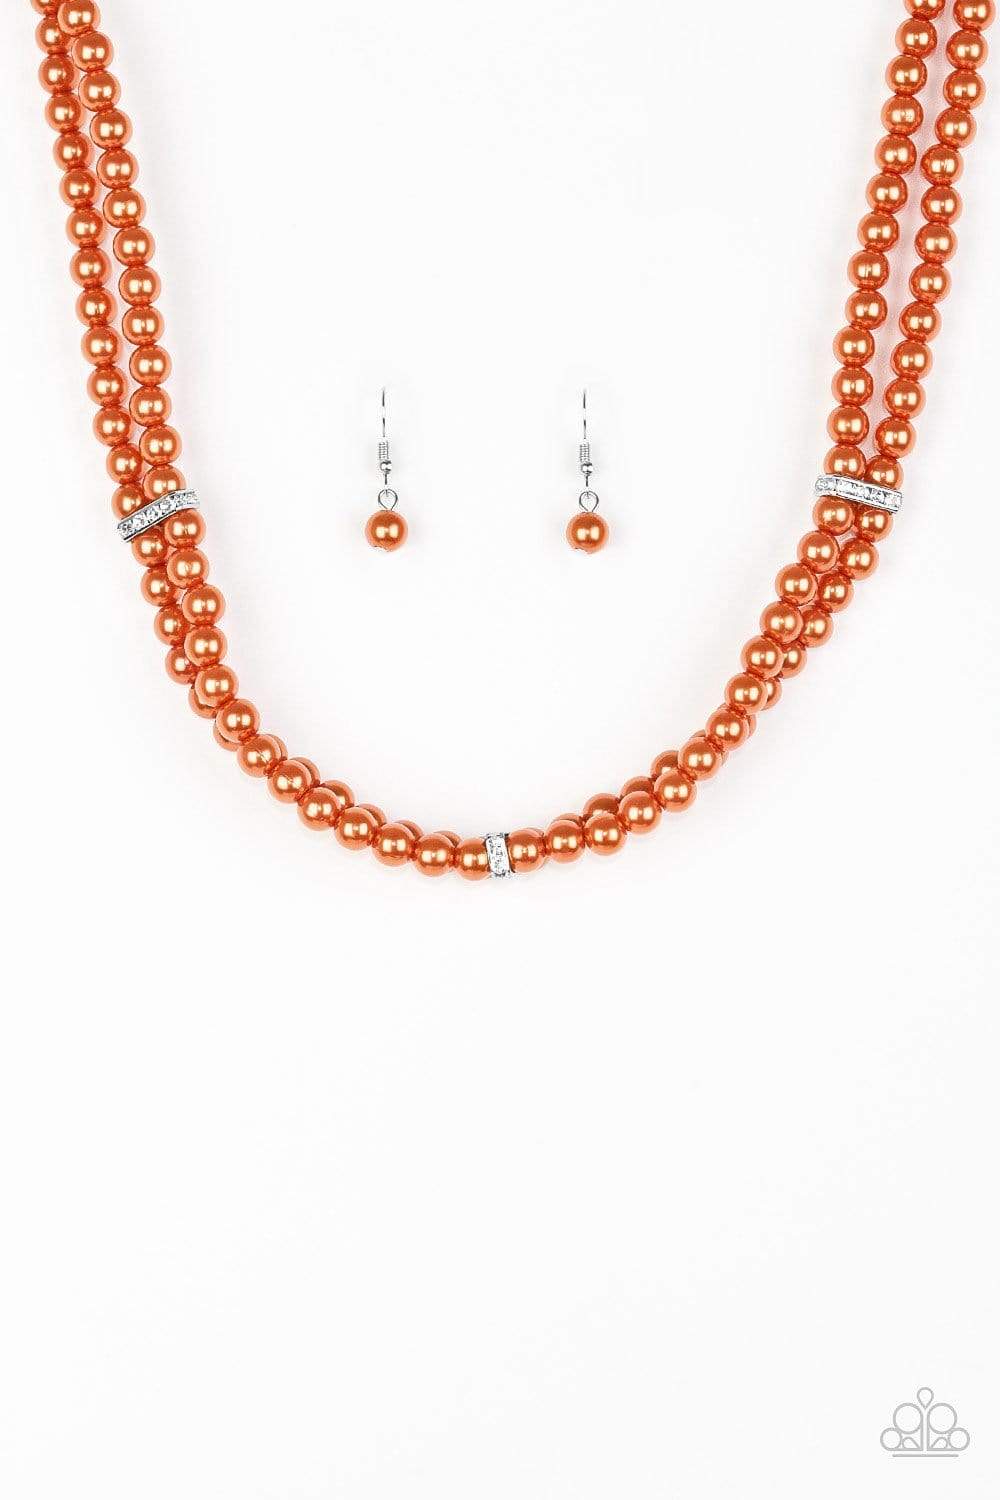 Put On Your Party Dress - Orange Necklace